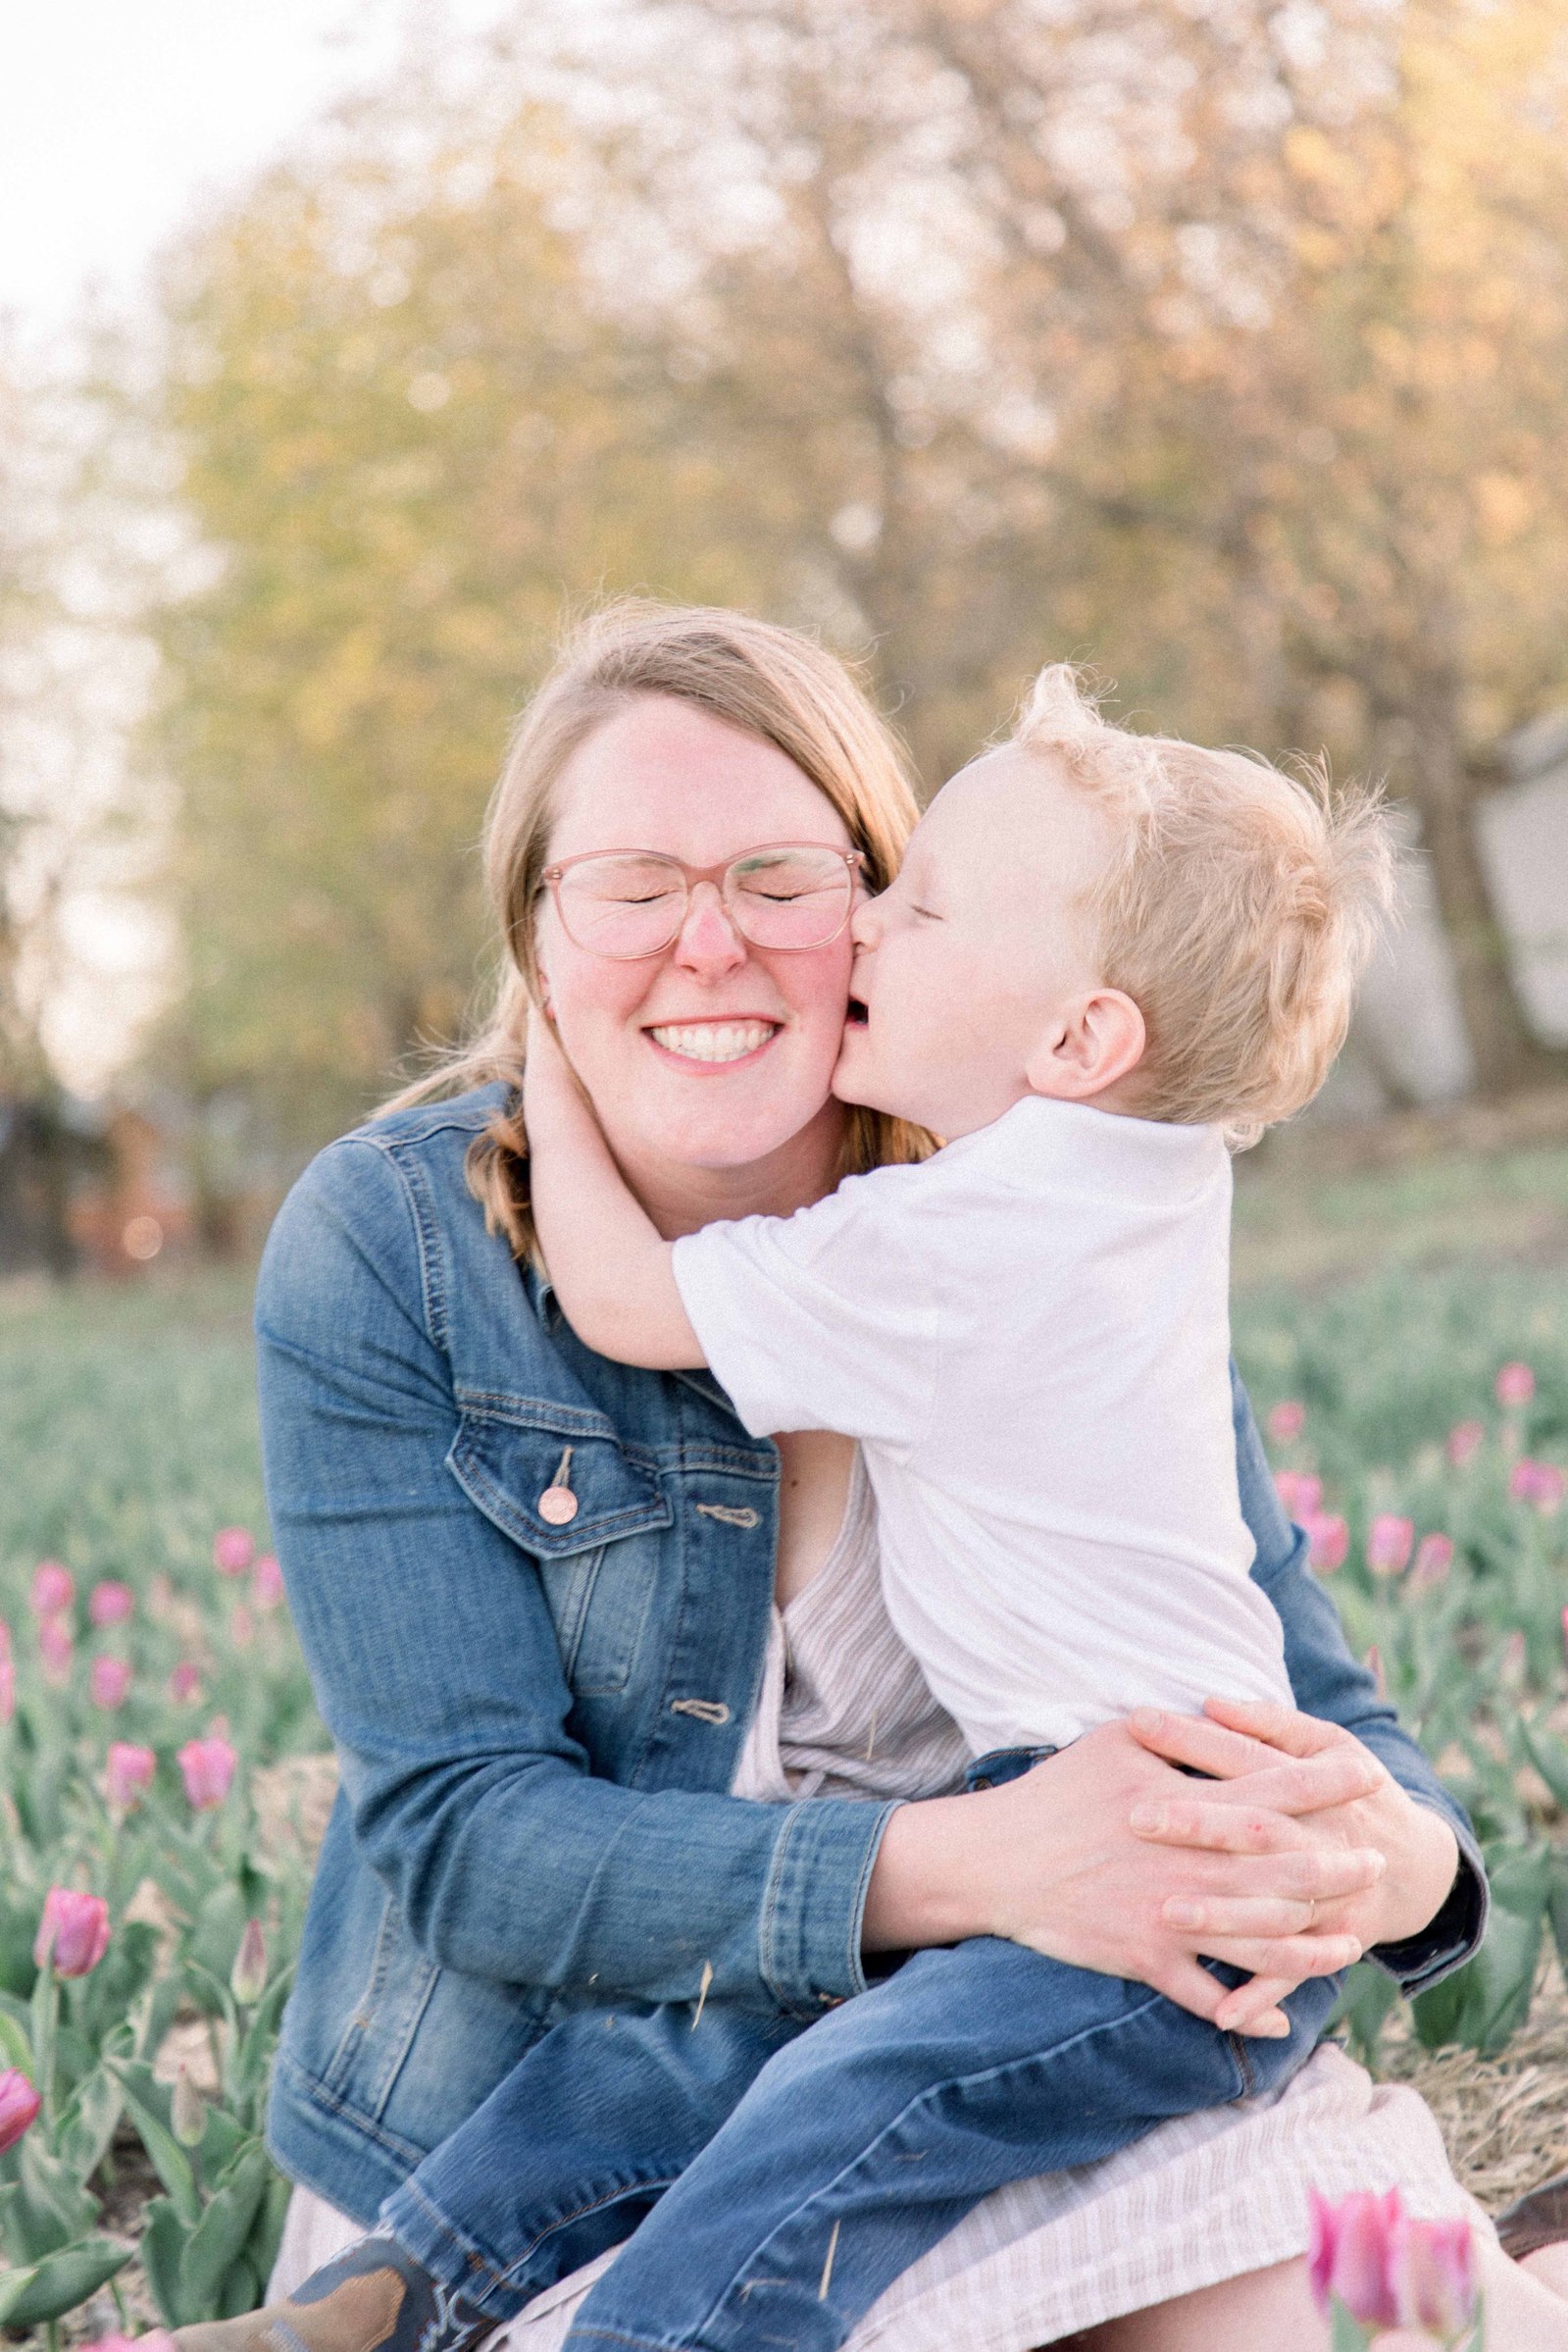 Mother & son sitting in a tulip field. Son gives mom a kiss on the cheek, and mom is smiling. Vankleek Hill Portrait Photographer, L'Orignal, Champlain, Prescott-Russell, Family Photography, Candid Photography, Emily VanderBeek Photography.